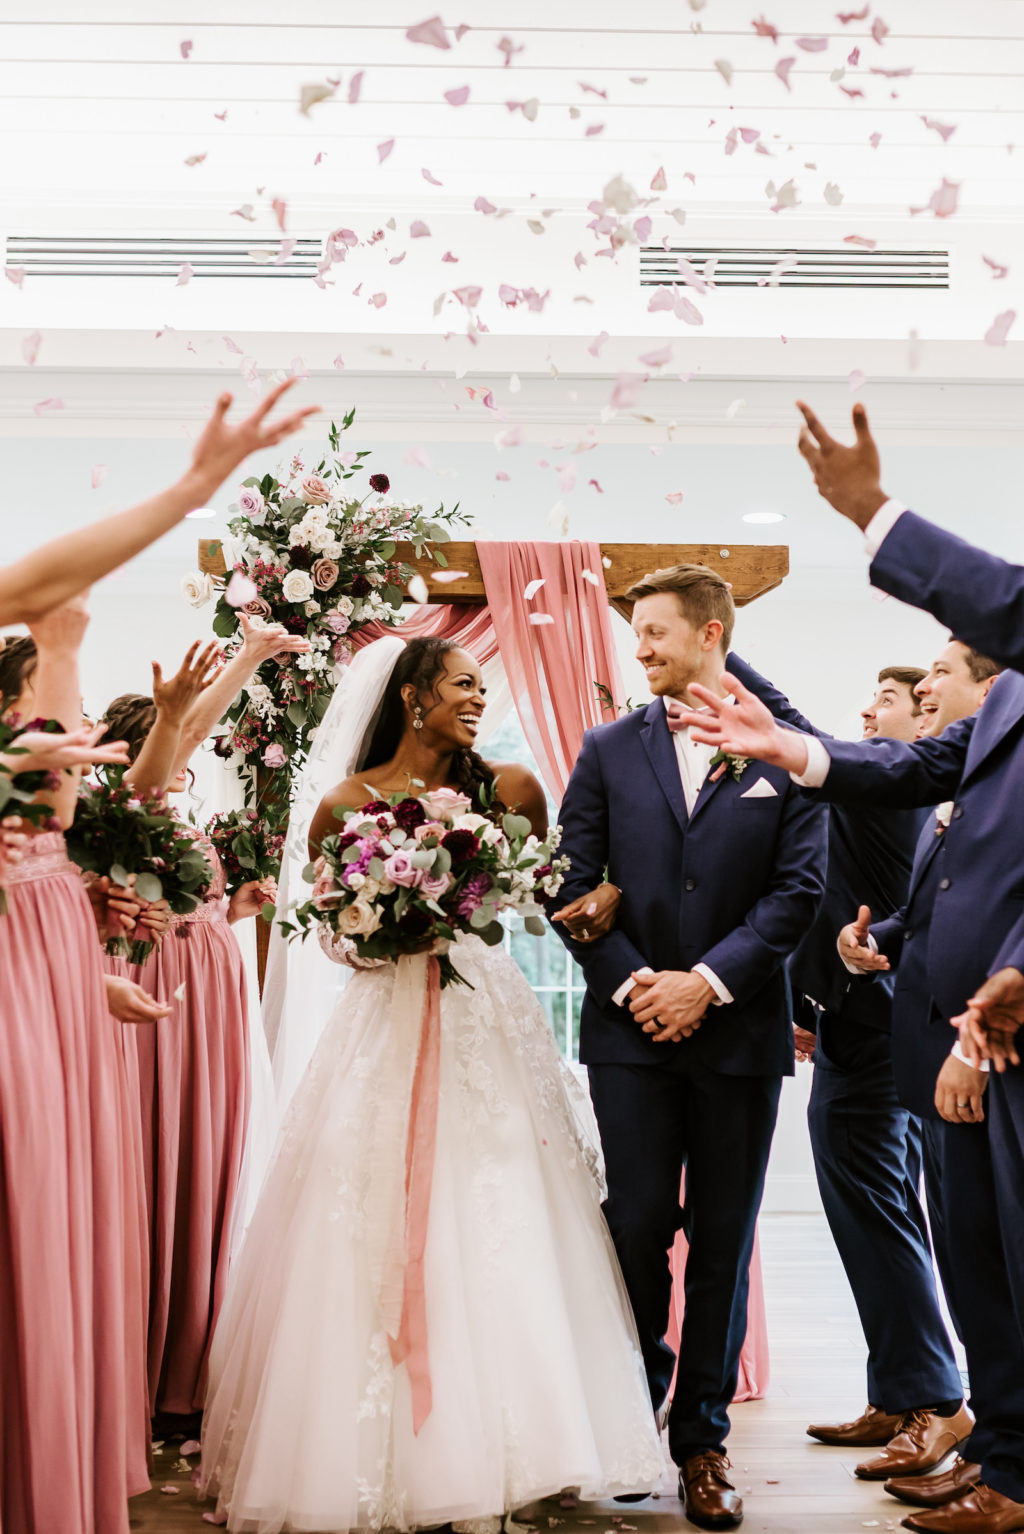 Indoor Church Wedding Rose Petal Toss at St. Pete Wedding Venue Harborside Chapel | Blush Pink Dusty Rose Mauve Bridesmaid Dresses | Groom and Groomsmen in Navy Blue Suit | Tulle and Lace Ballgown Wedding Dress